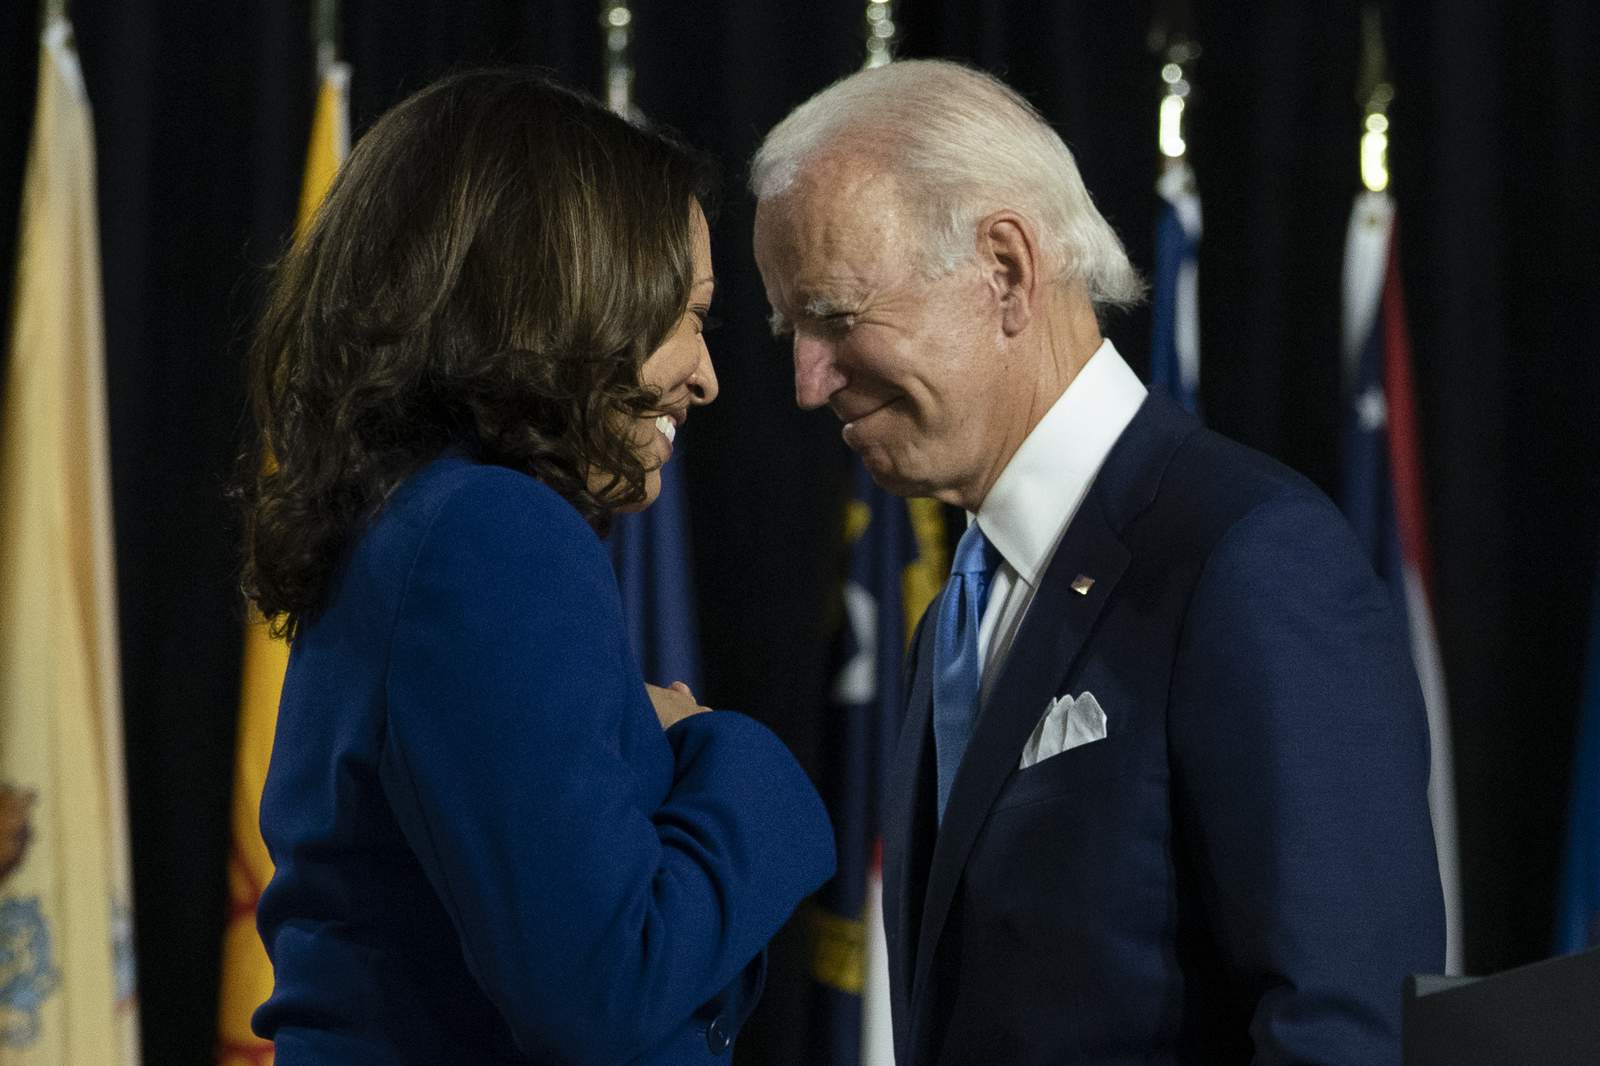 Michigan leaders, groups react after Biden projected as winner of White House race